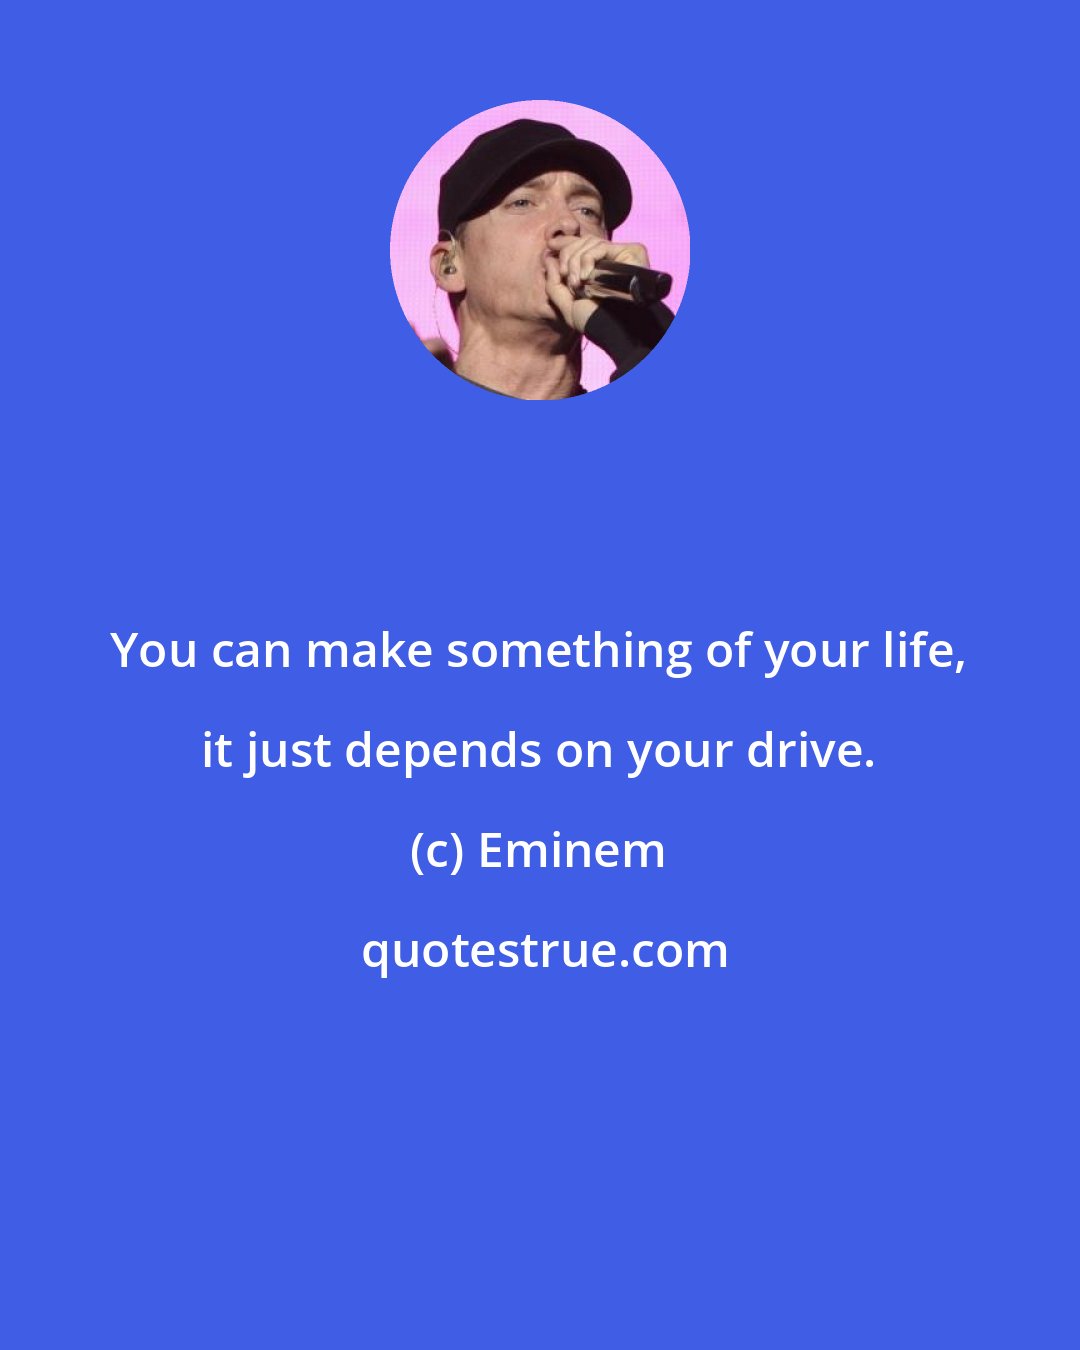 Eminem: You can make something of your life, it just depends on your drive.